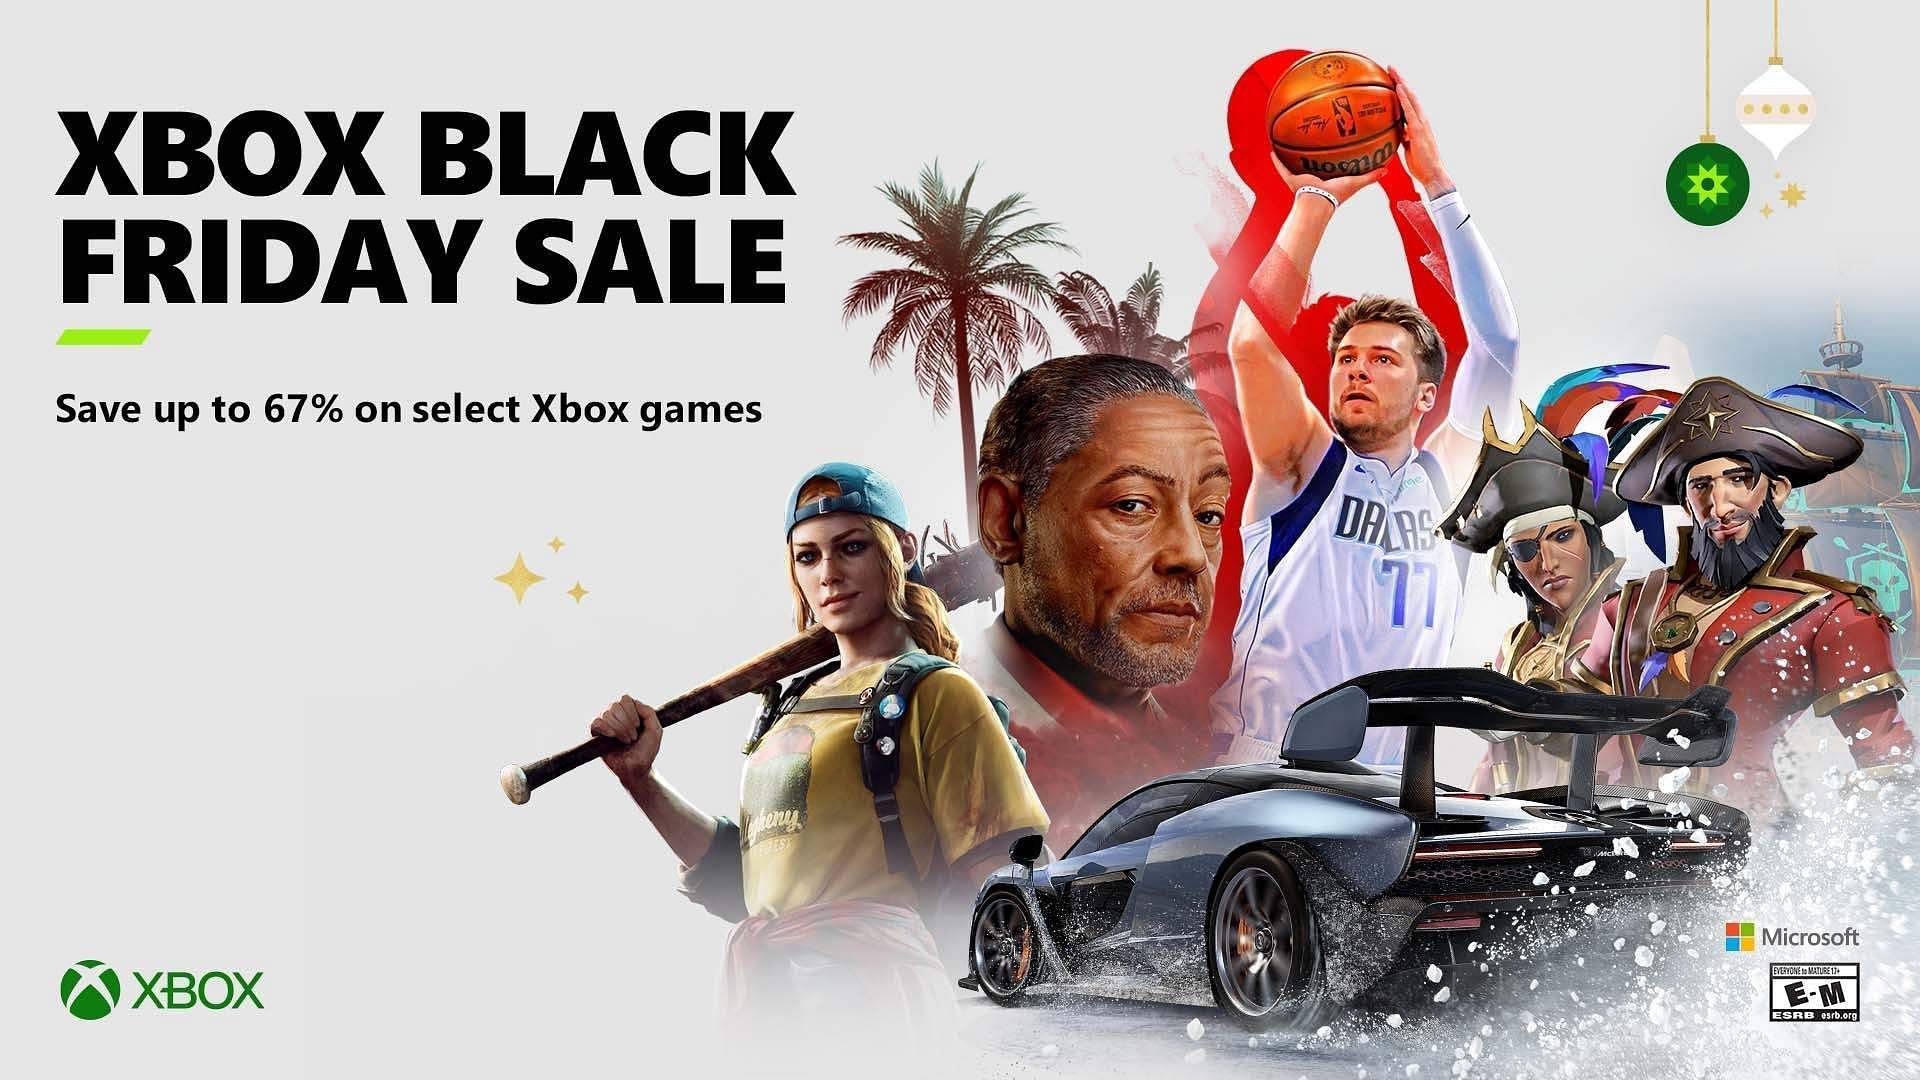 Black Friday Sale deals and discounts for Xbox